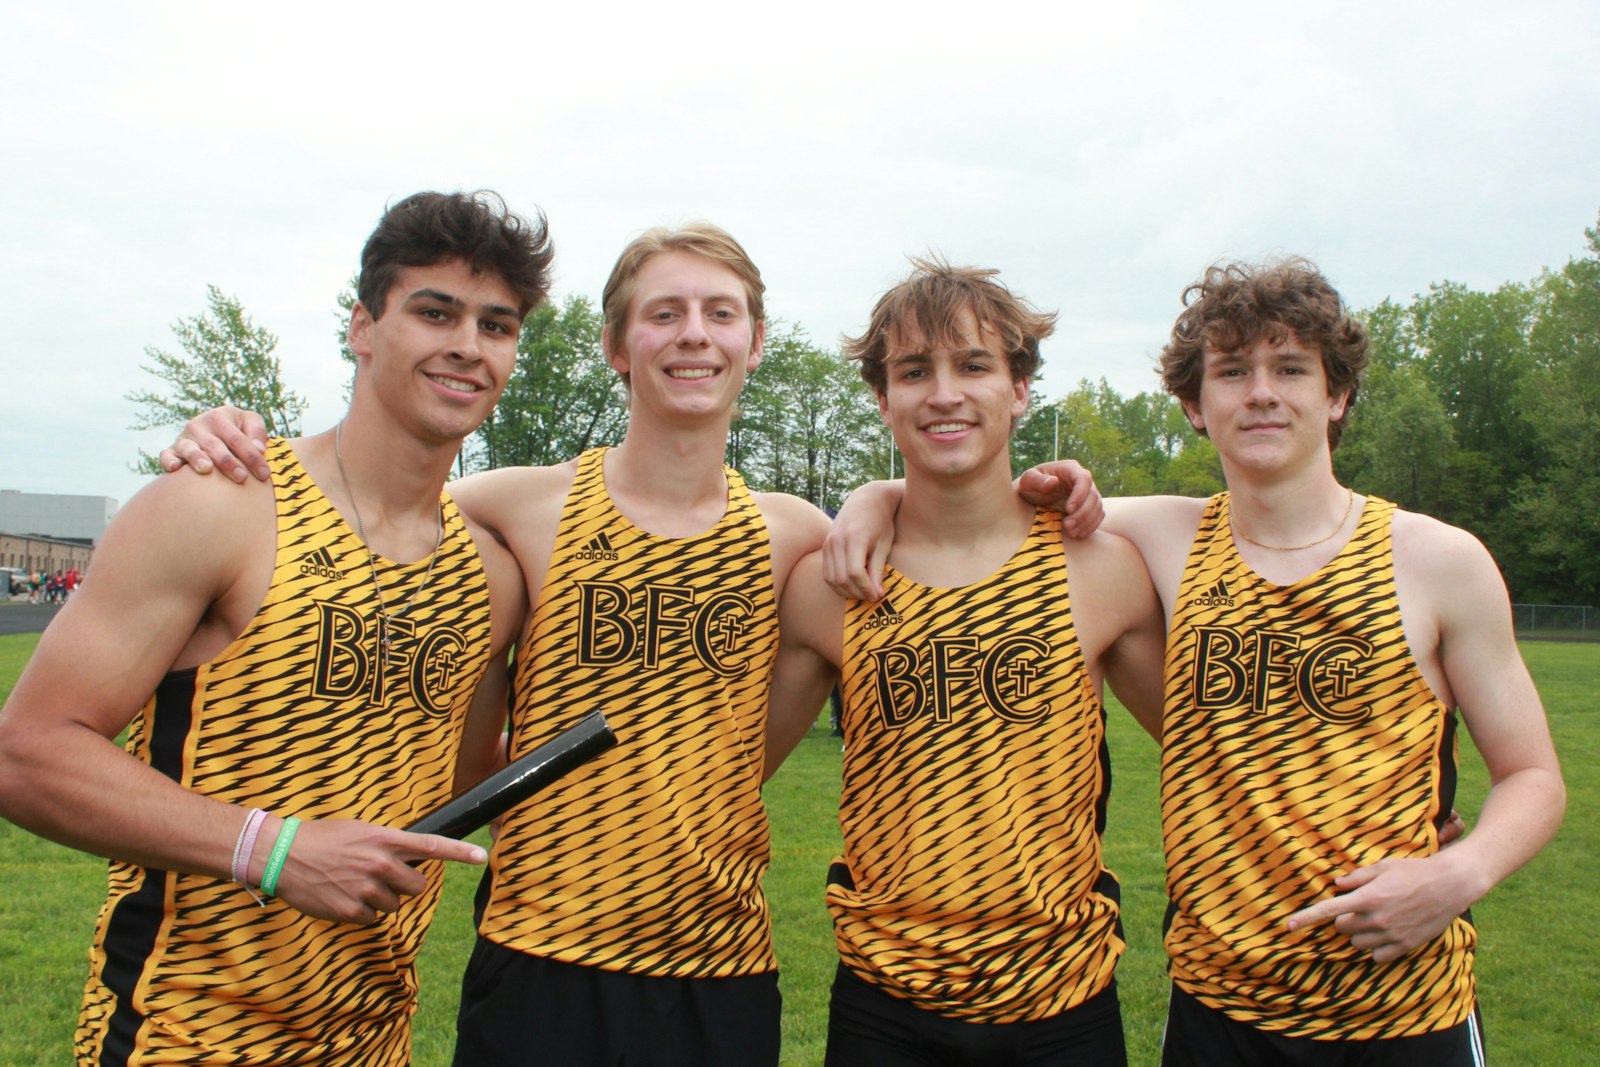 Madison Heights Bishop Foley’s boys won a state title in the 4x100 relay, as Gus Toppi, Jackson Zeiter, Ethan Eisenhauer and Adam Kidder ran 44.38 at the Division 3 meet. (Photo by Wright Wilson | Special to Detroit Catholic)